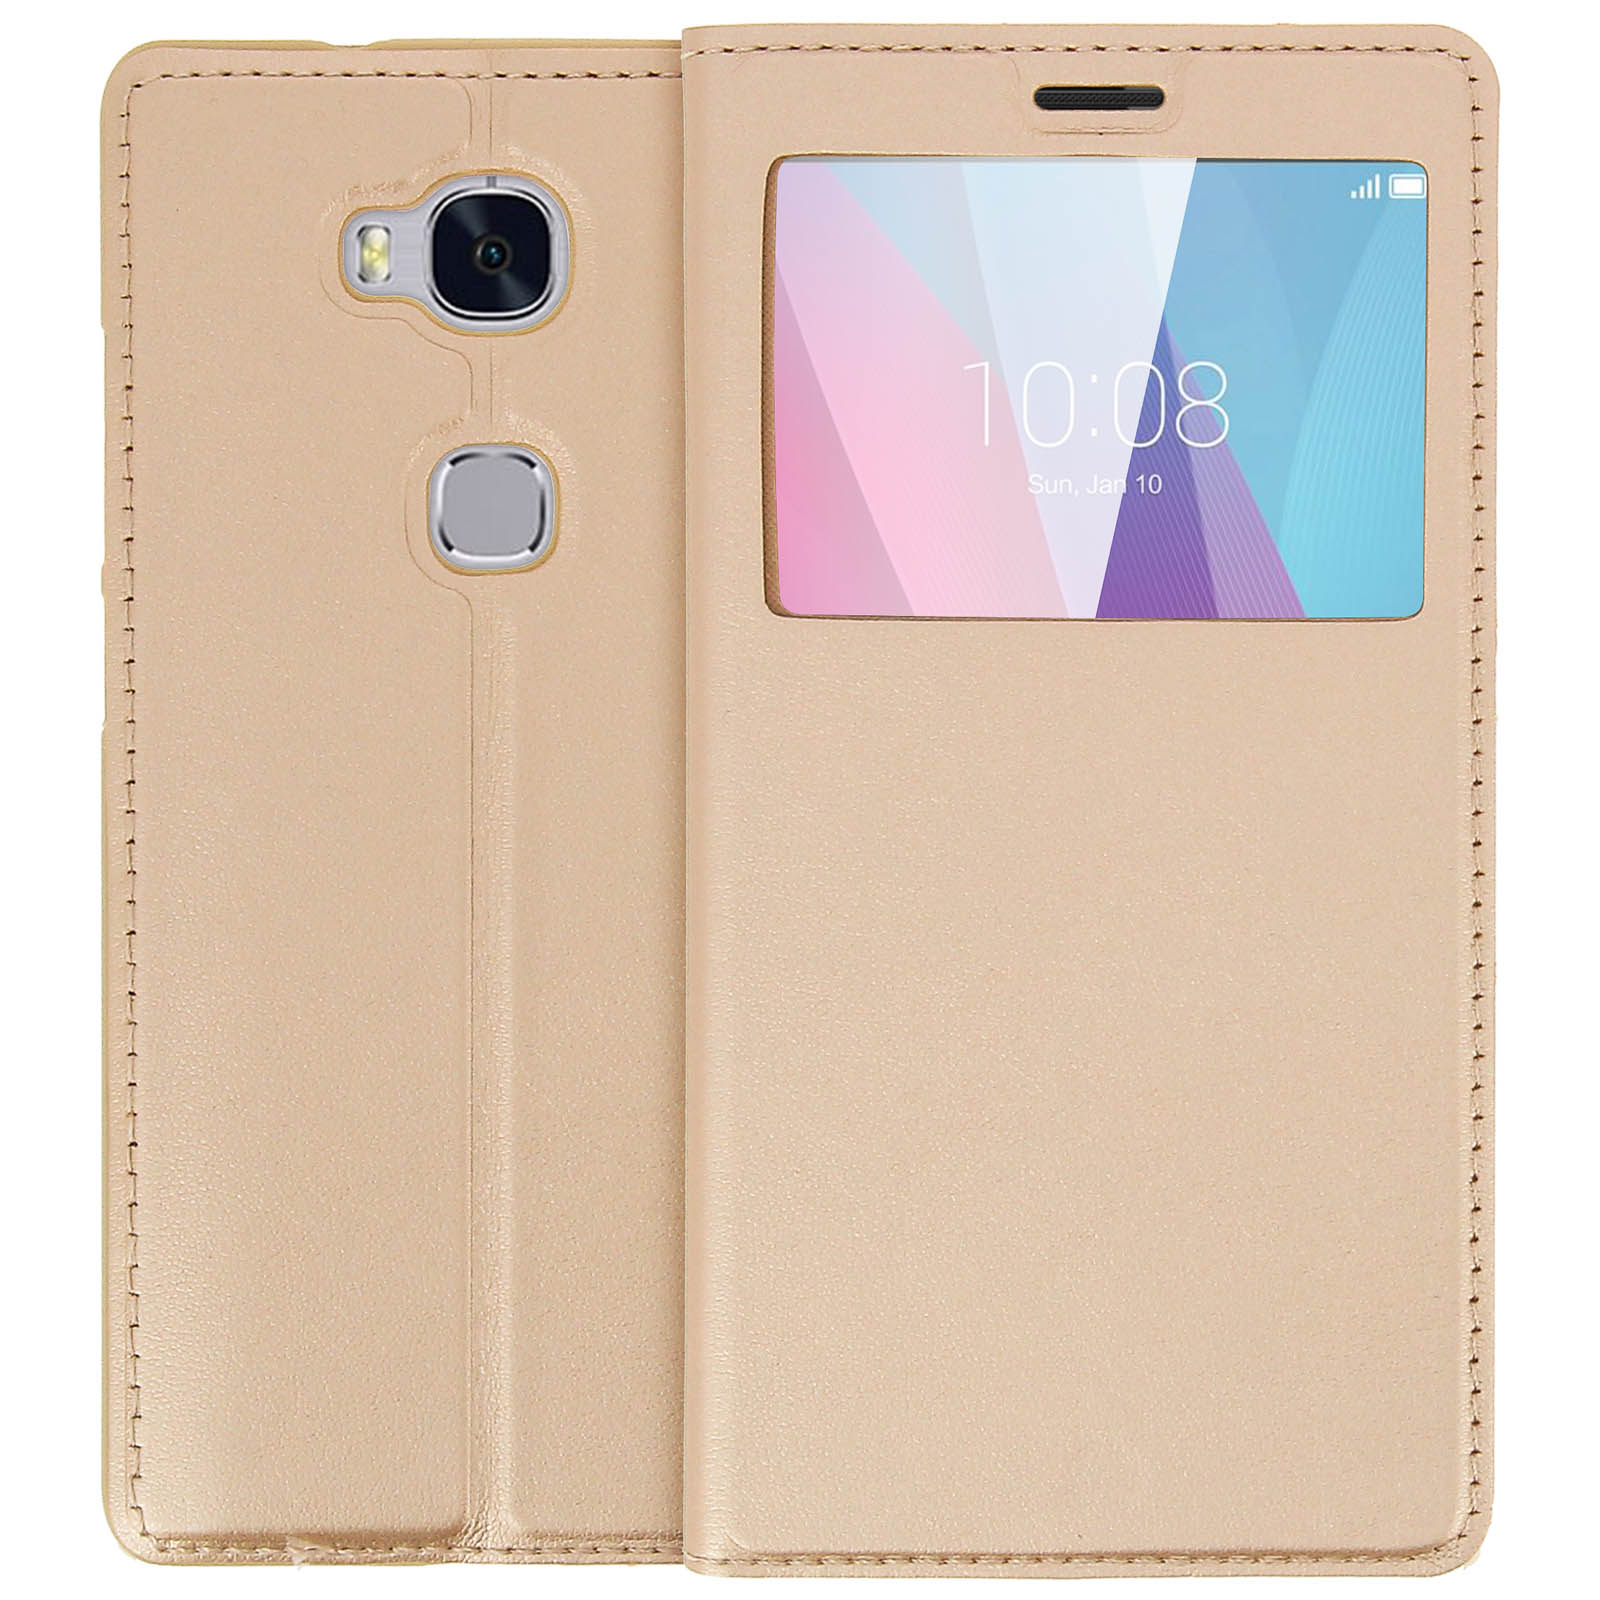 Gold View 5X, Honor Series, Honor, CLAPPIO Bookcover, Cover